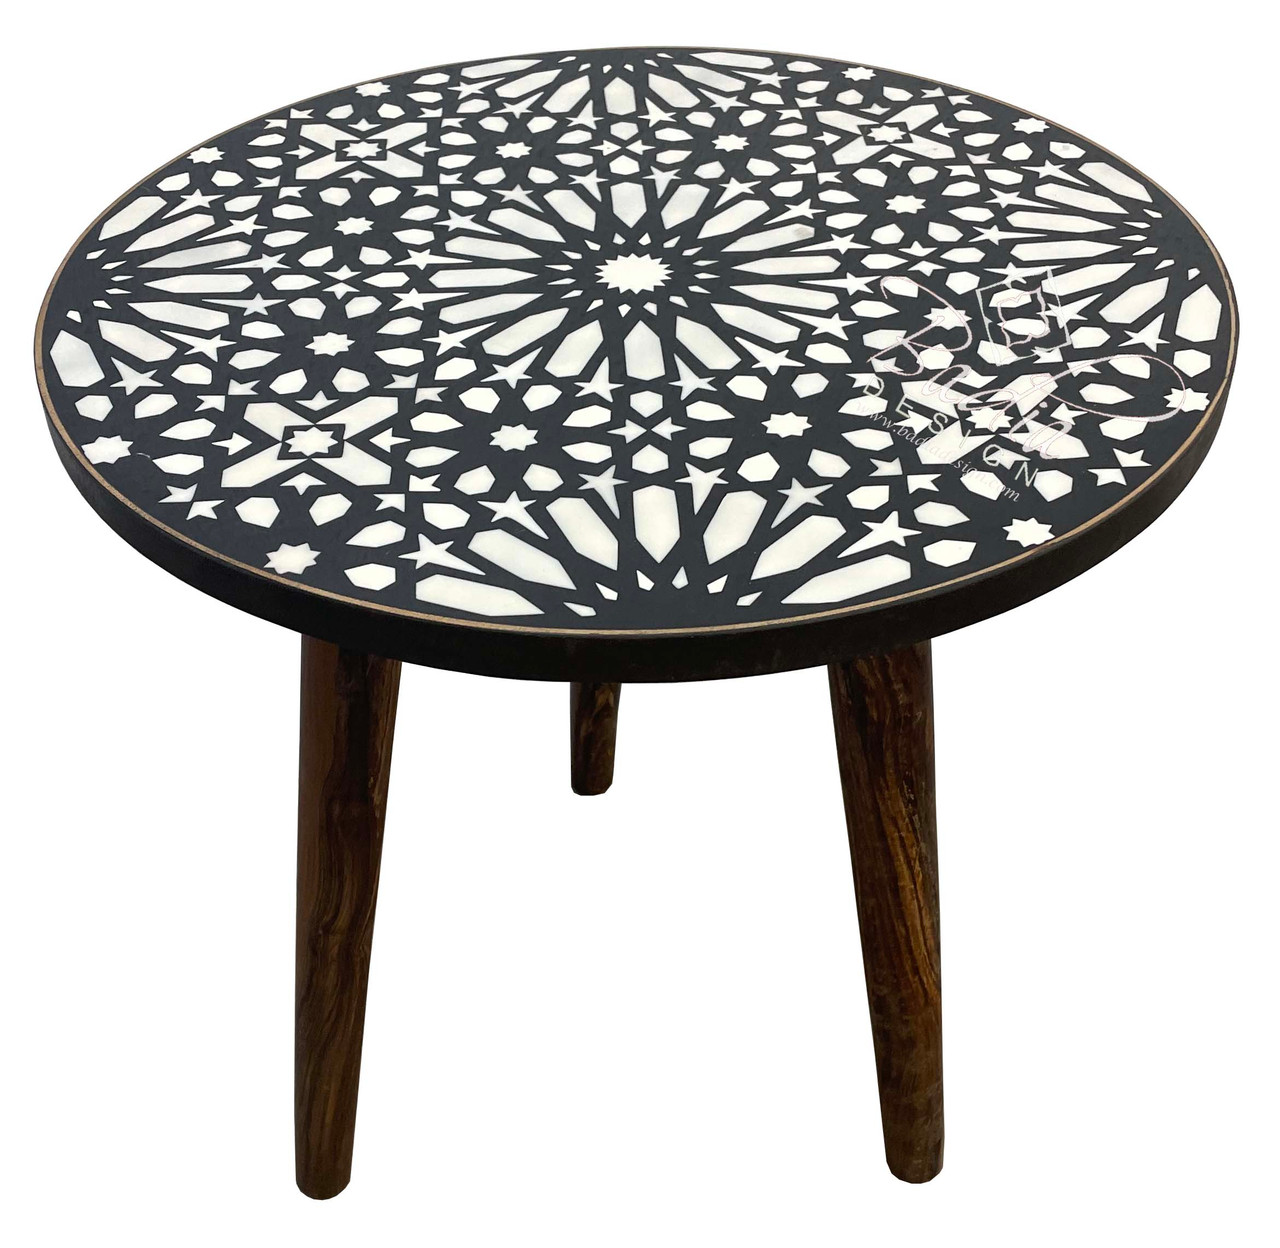 Round Black and White Coffee Table Made of Wood and Resin - MOP-ST140